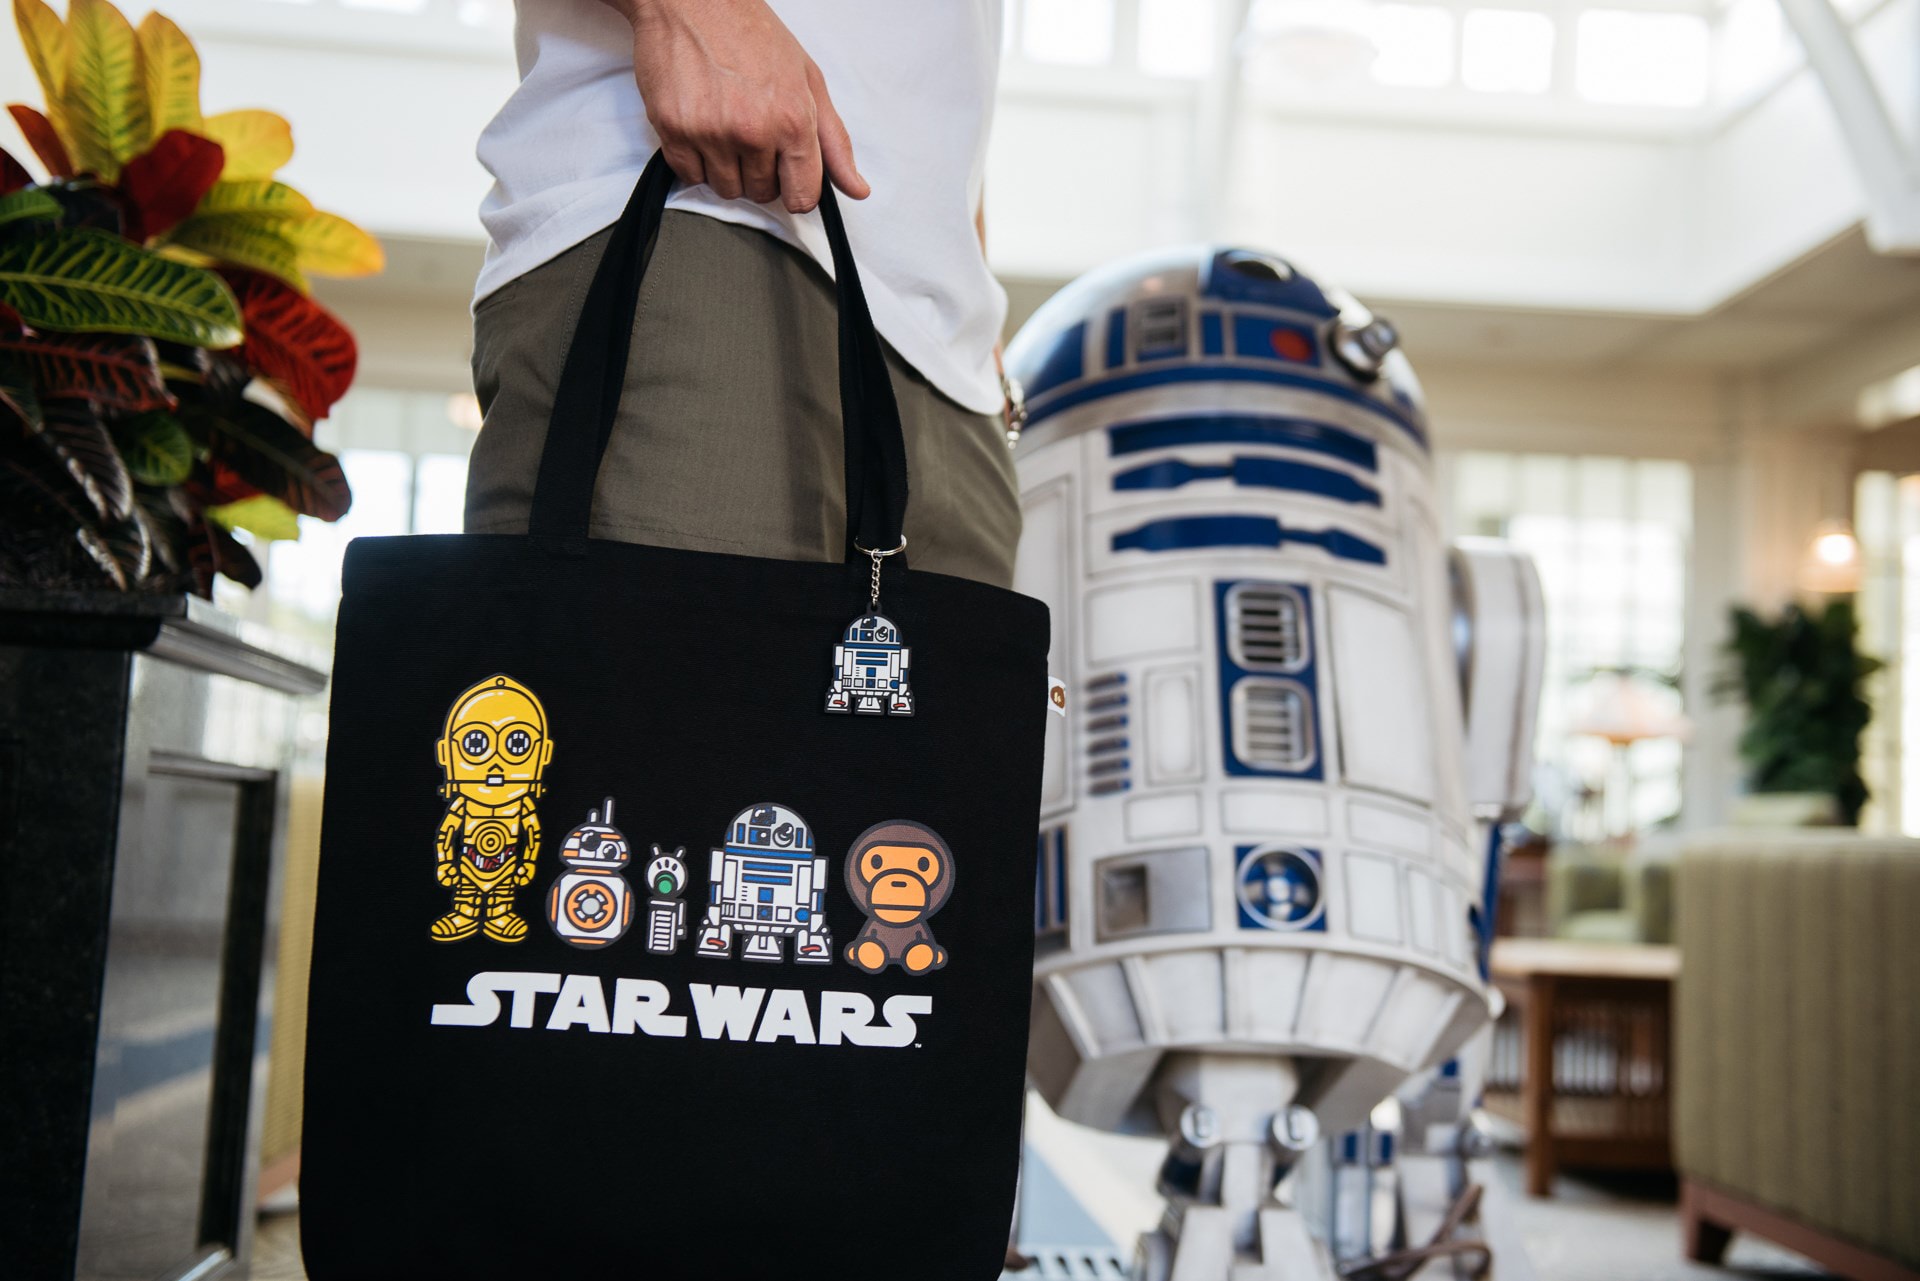 BAPE Has Another Star Wars Collaboration in the Works the rise of skywalker collaborations teasers baby milo accessories 